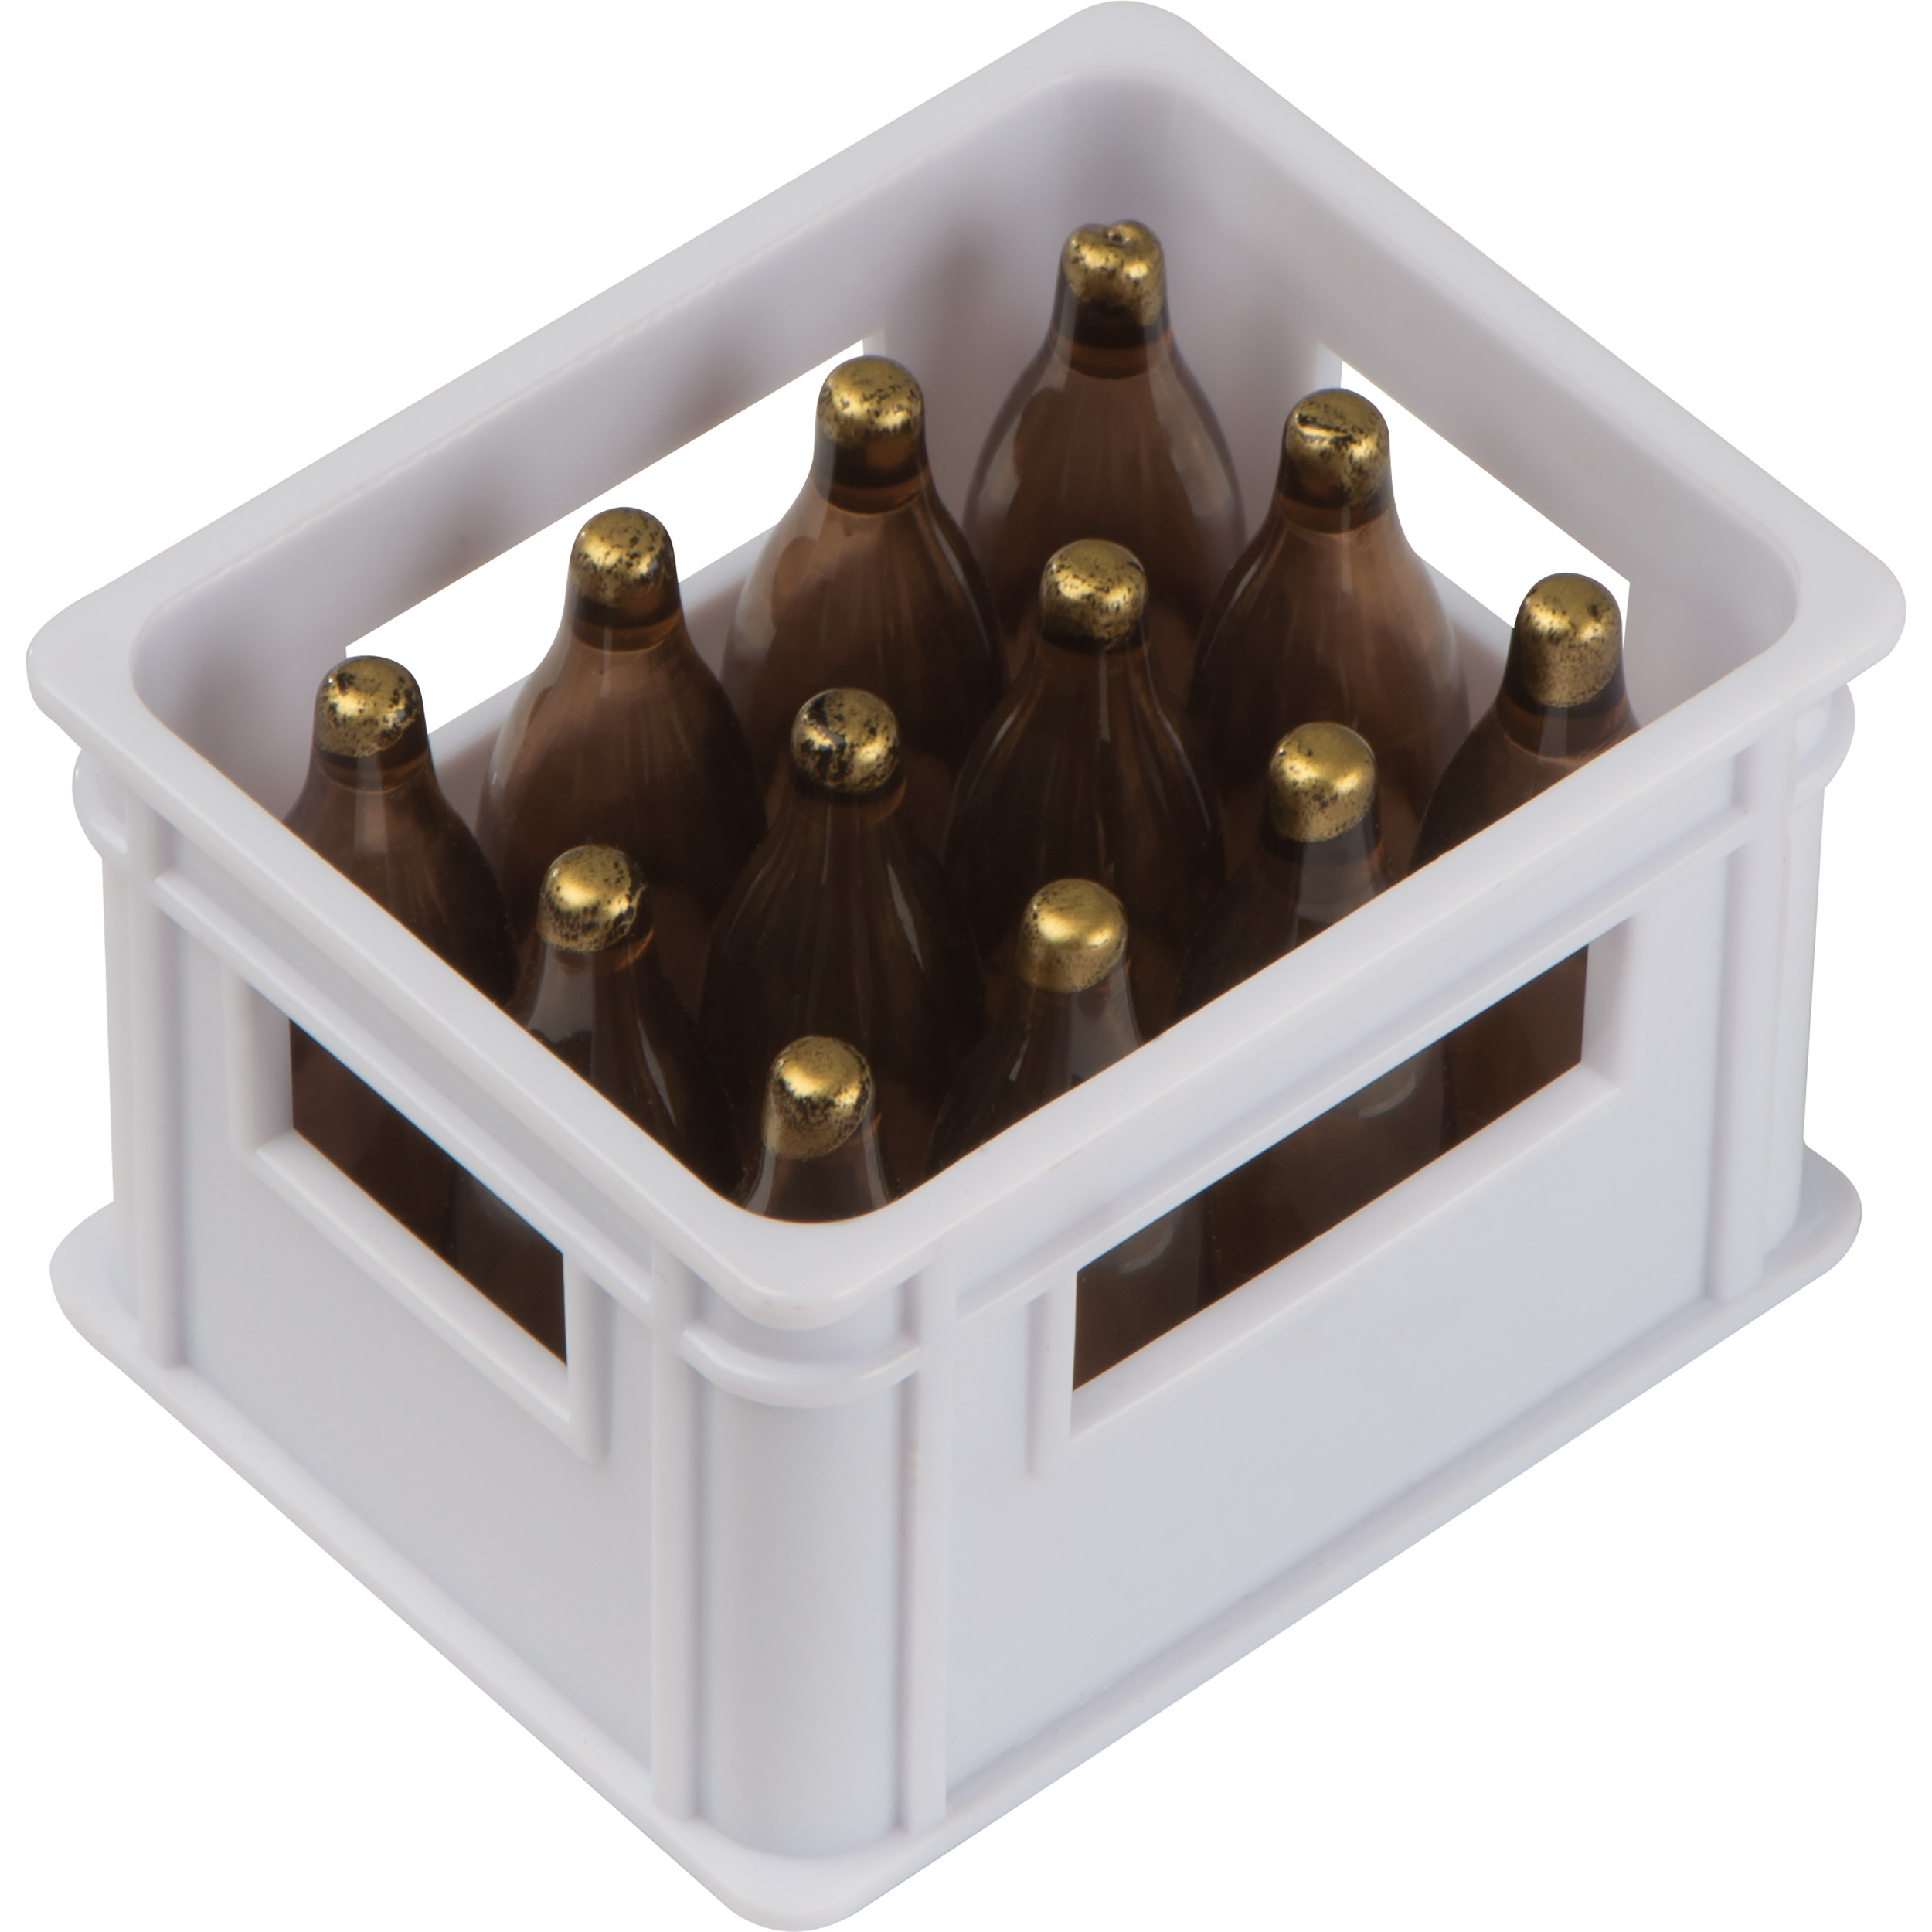 Bottle opener in the shape of a beer crate